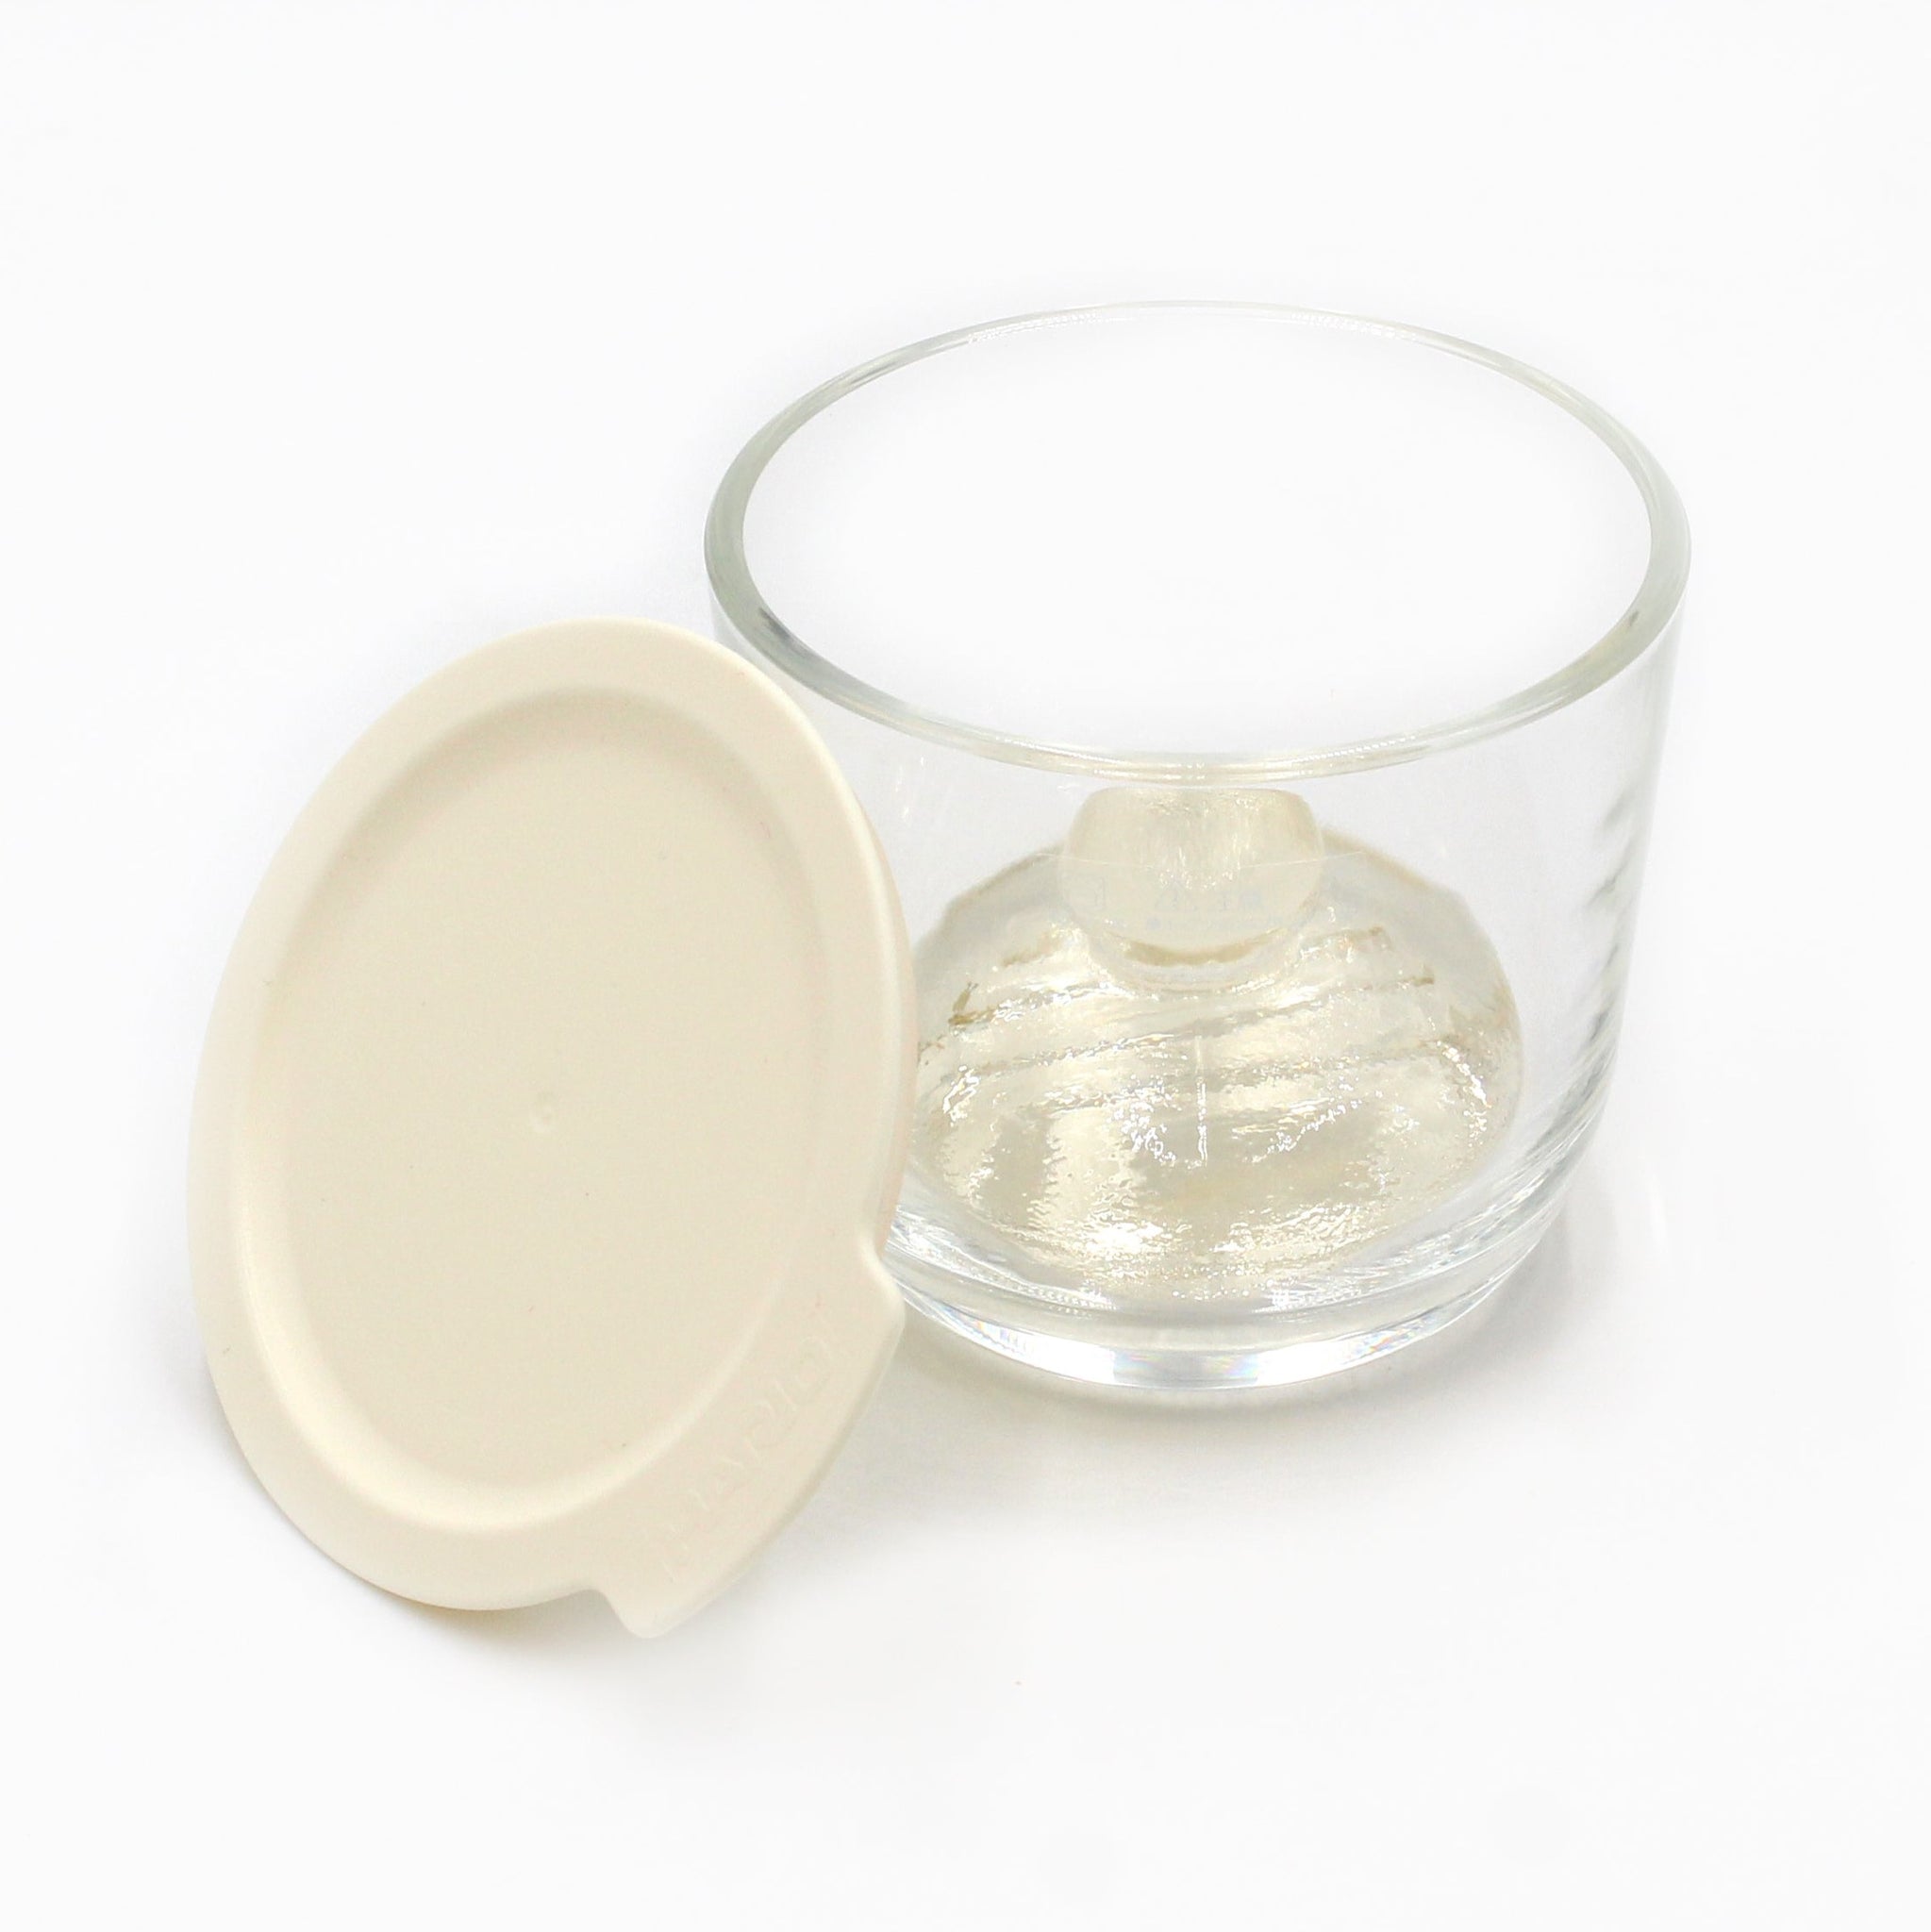 Purchase Wholesale glass cup bamboo lid. Free Returns & Net 60